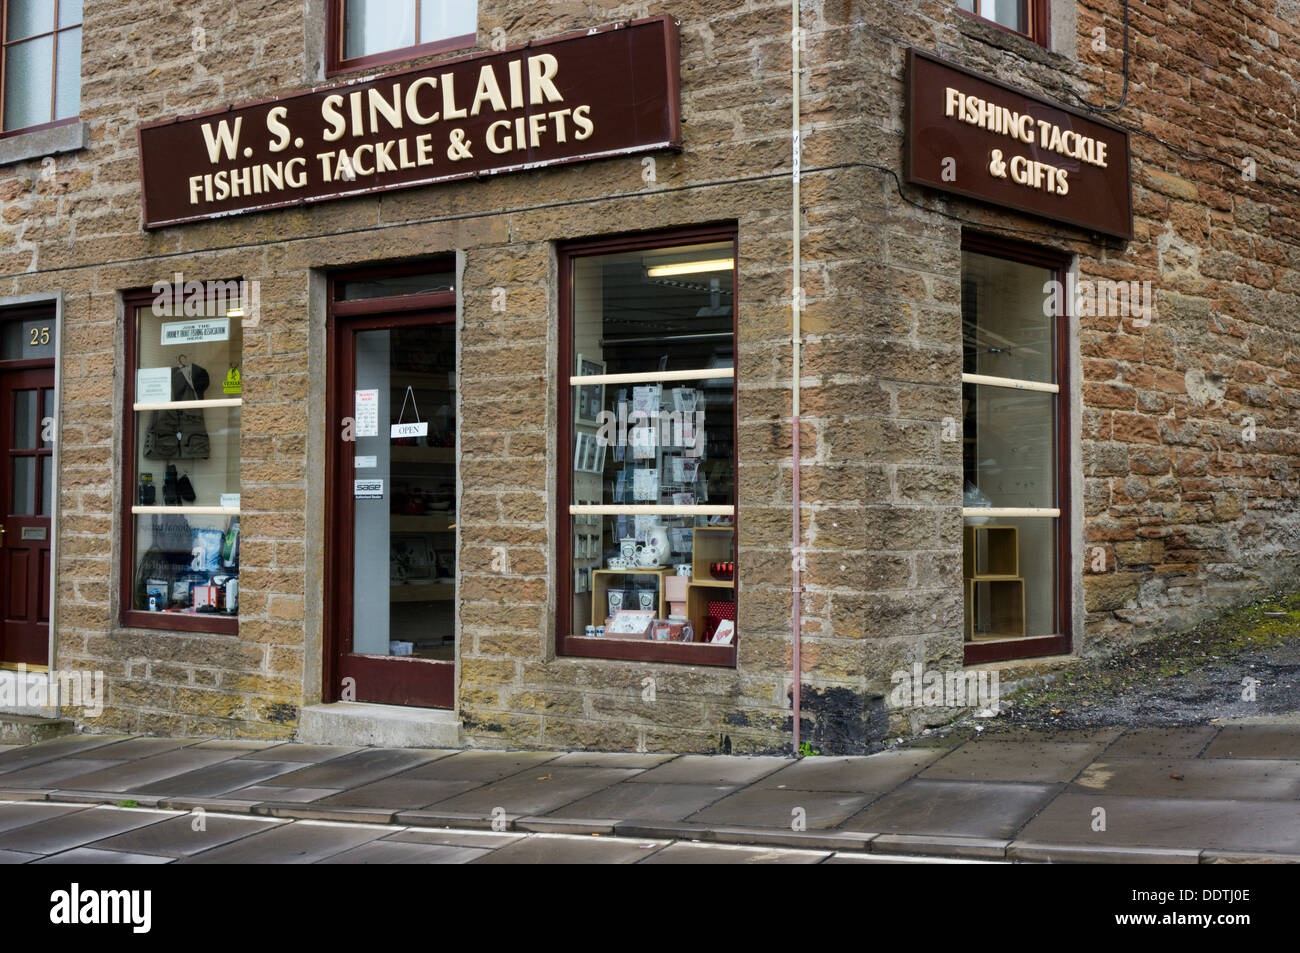 W. S. Sinclair Fishing Tackle & Gifts shop in Stromness, Orkney Stock Photo  - Alamy